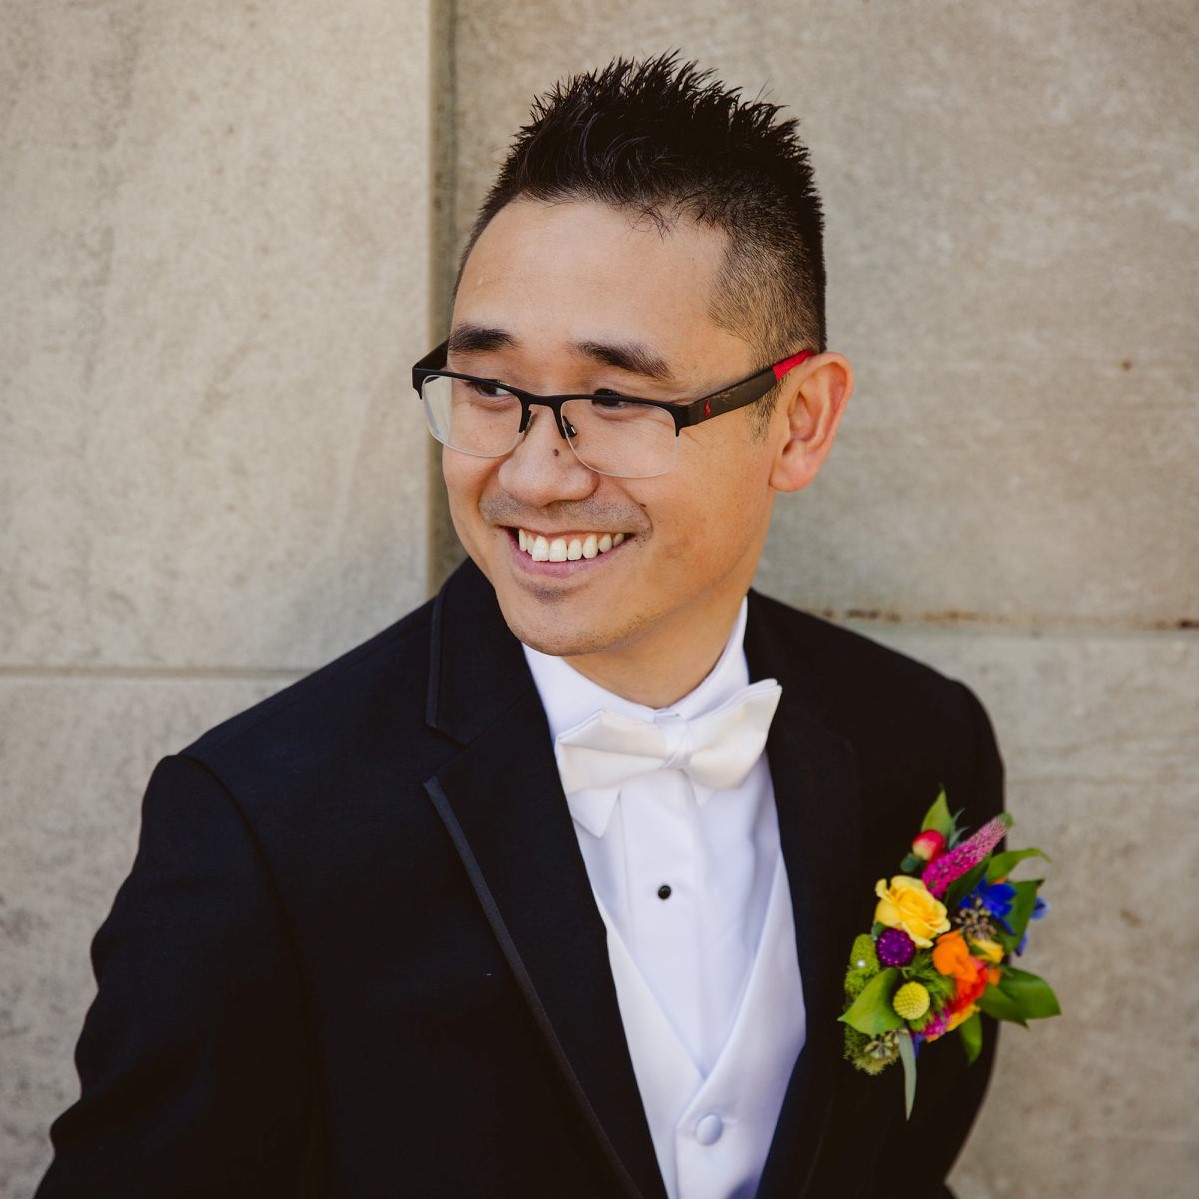 Asian in a tux smiling